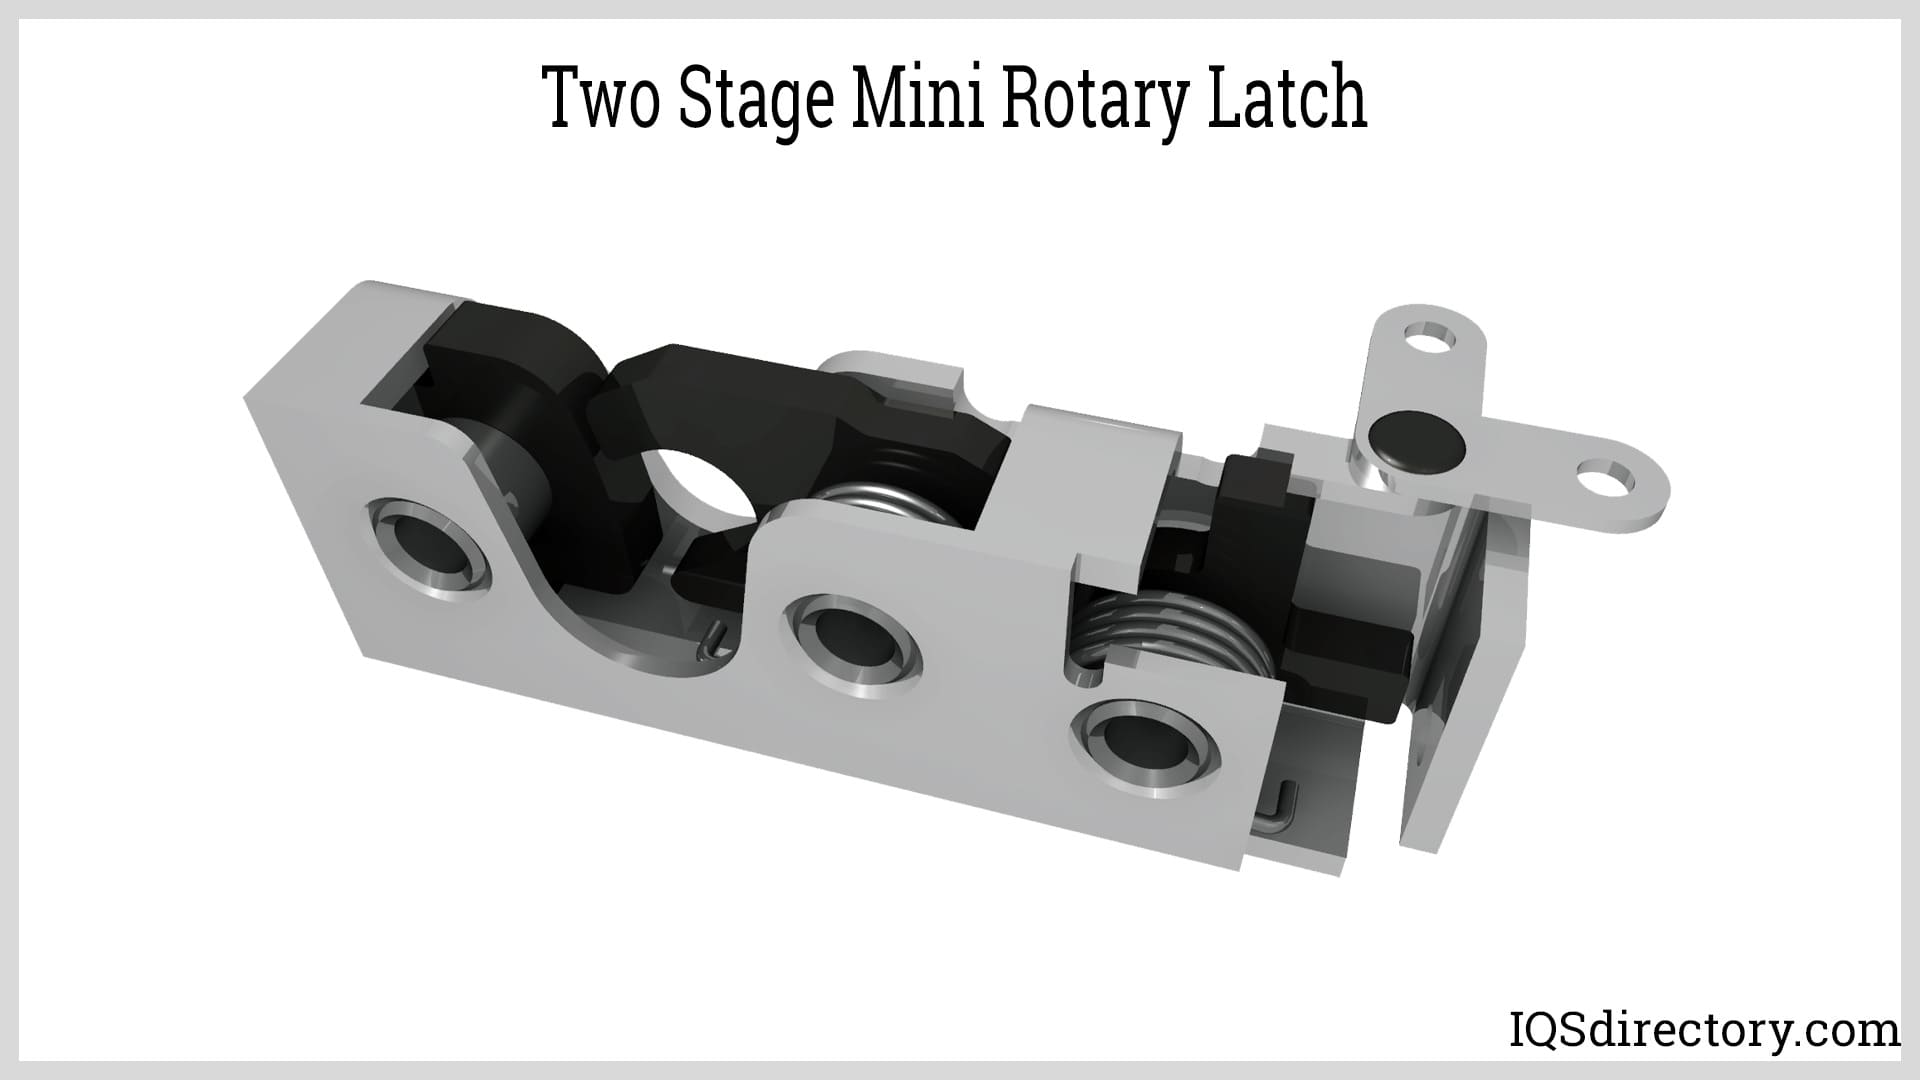 Two Stage Mini Rotary Latch